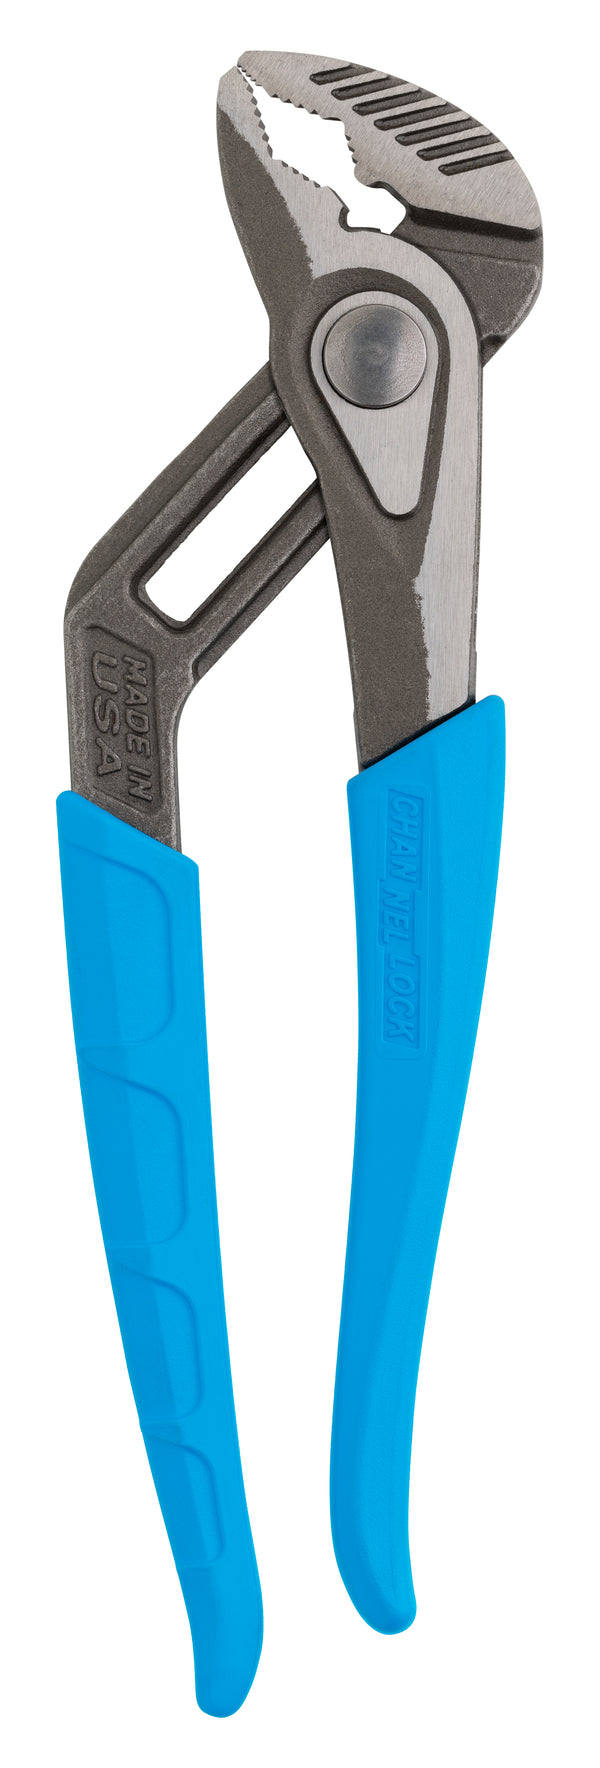 Channellock 432X 10-INCH SPEEDGRIP™ V-JAW TONGUE & GROOVE PLIERS